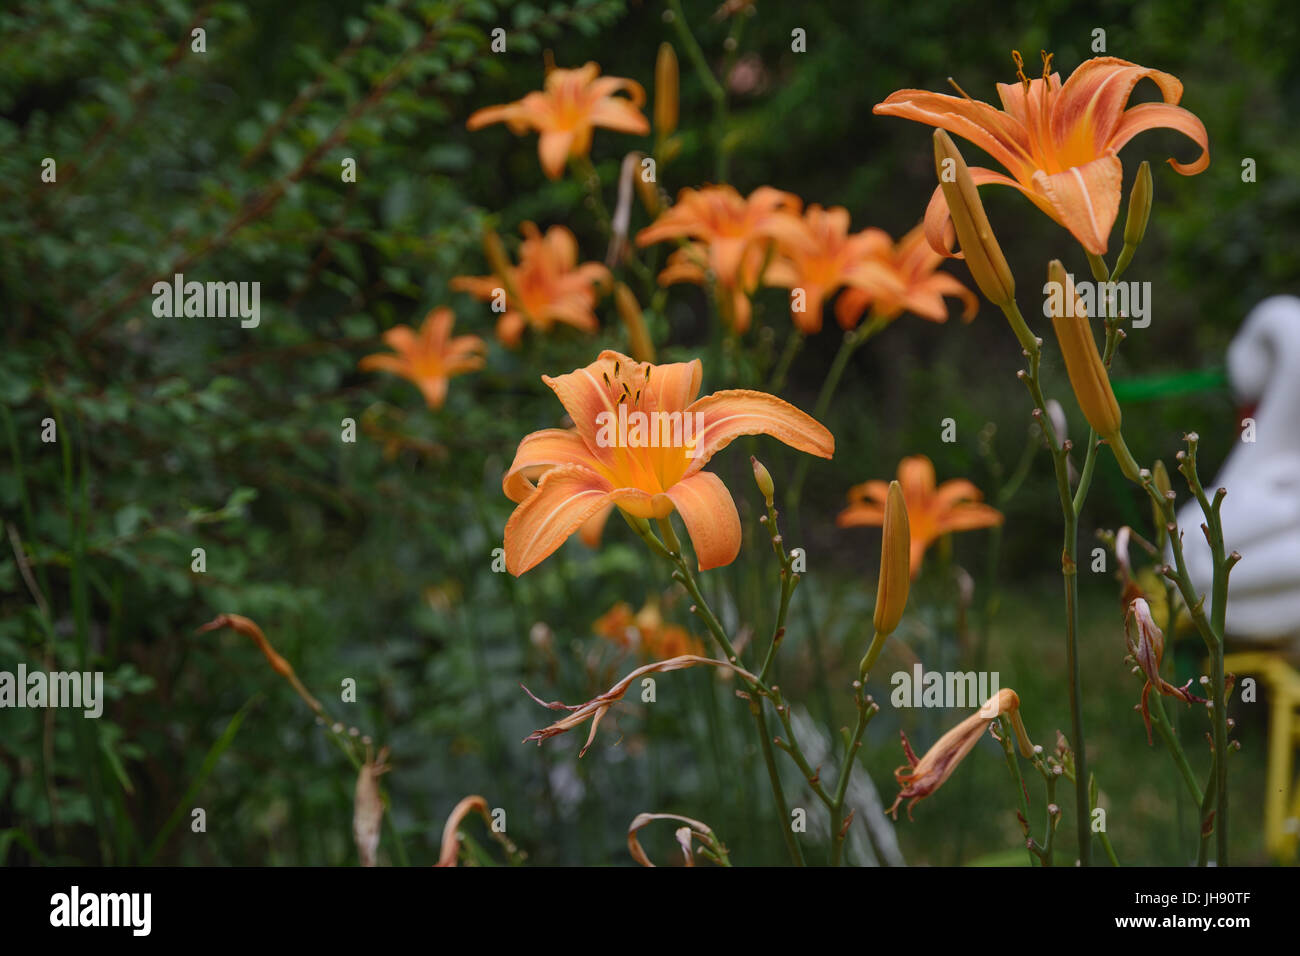 Orange lily, fire lily, tiger lily, or lilium bulbiferum. Flowers and buds in the garden. Selective focus. Stock Photo